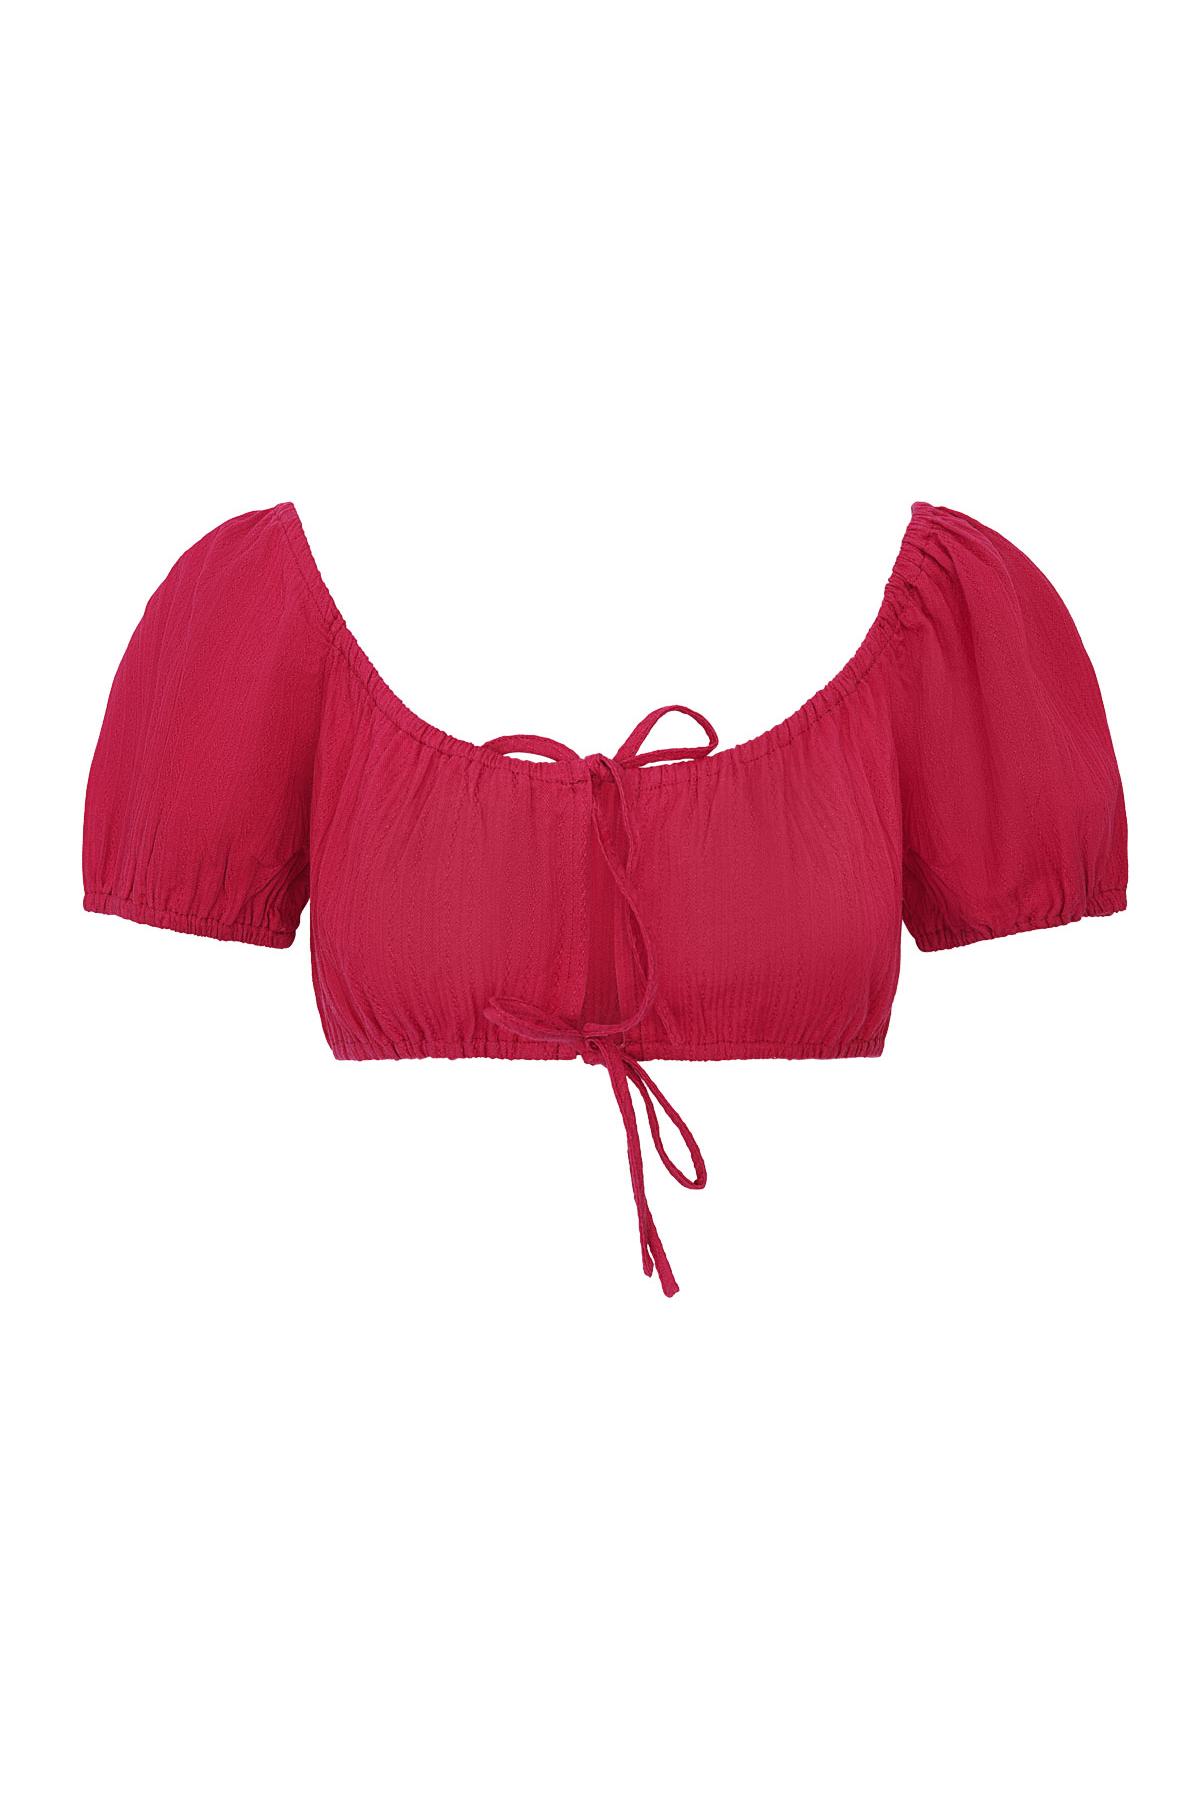 Crop top knotted Red S